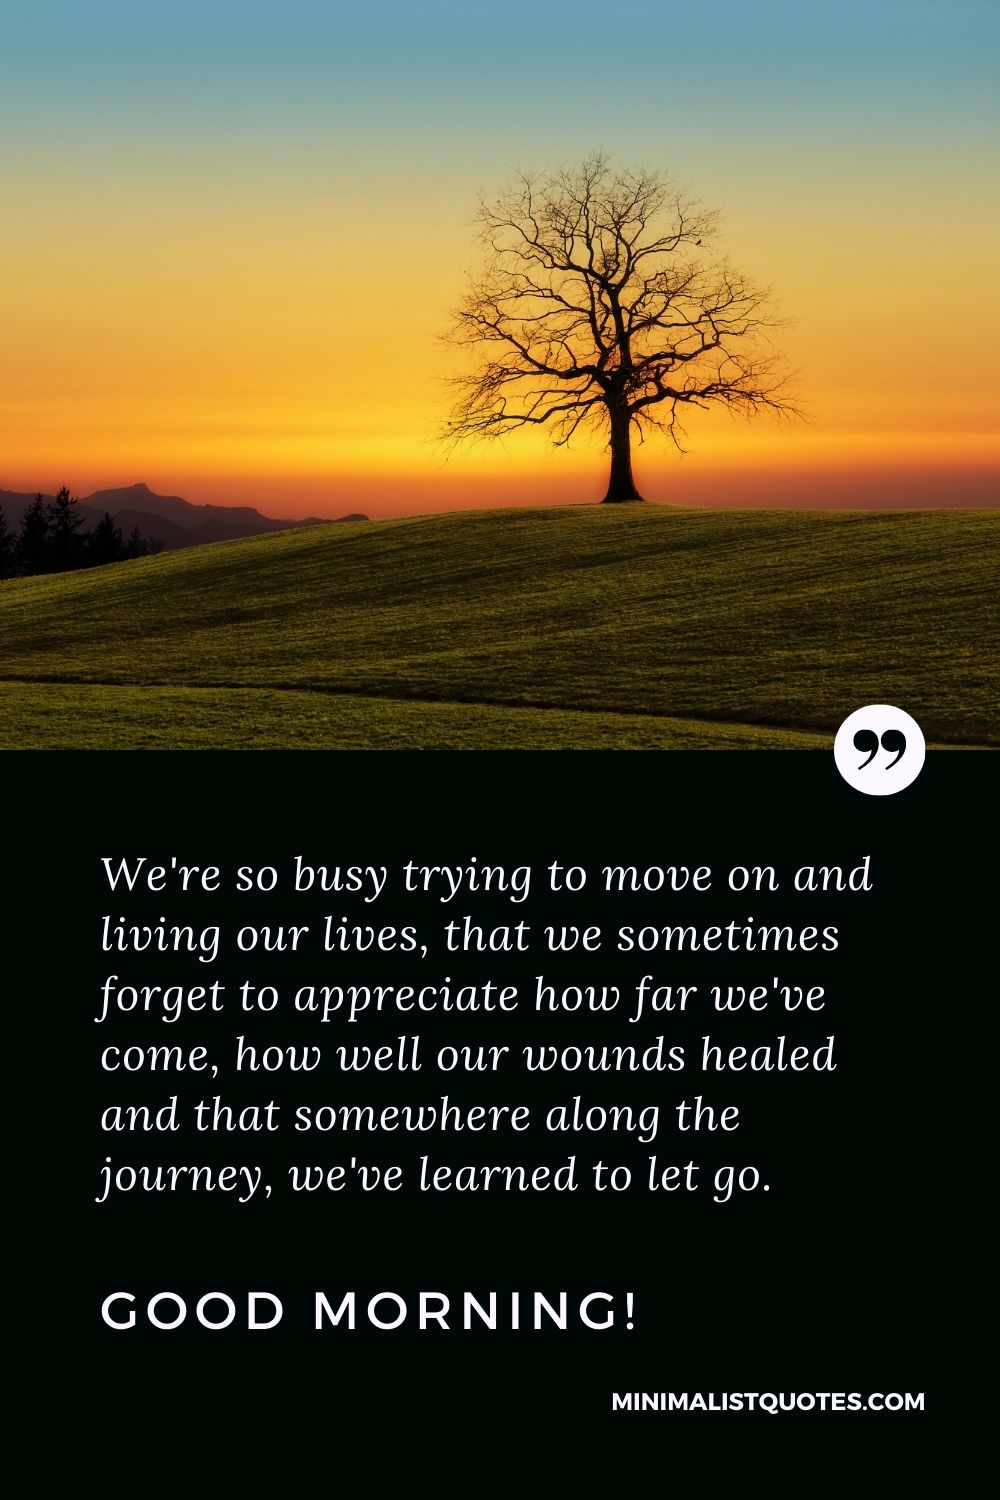 Good Morning Quote, Wish & Message With Image: We're so busy trying to move on and living our lives, that we sometimes forget to appreciate how far we've come, how well our wounds healed and that somewhere along the journey, we've learned to let go. Good Morning!